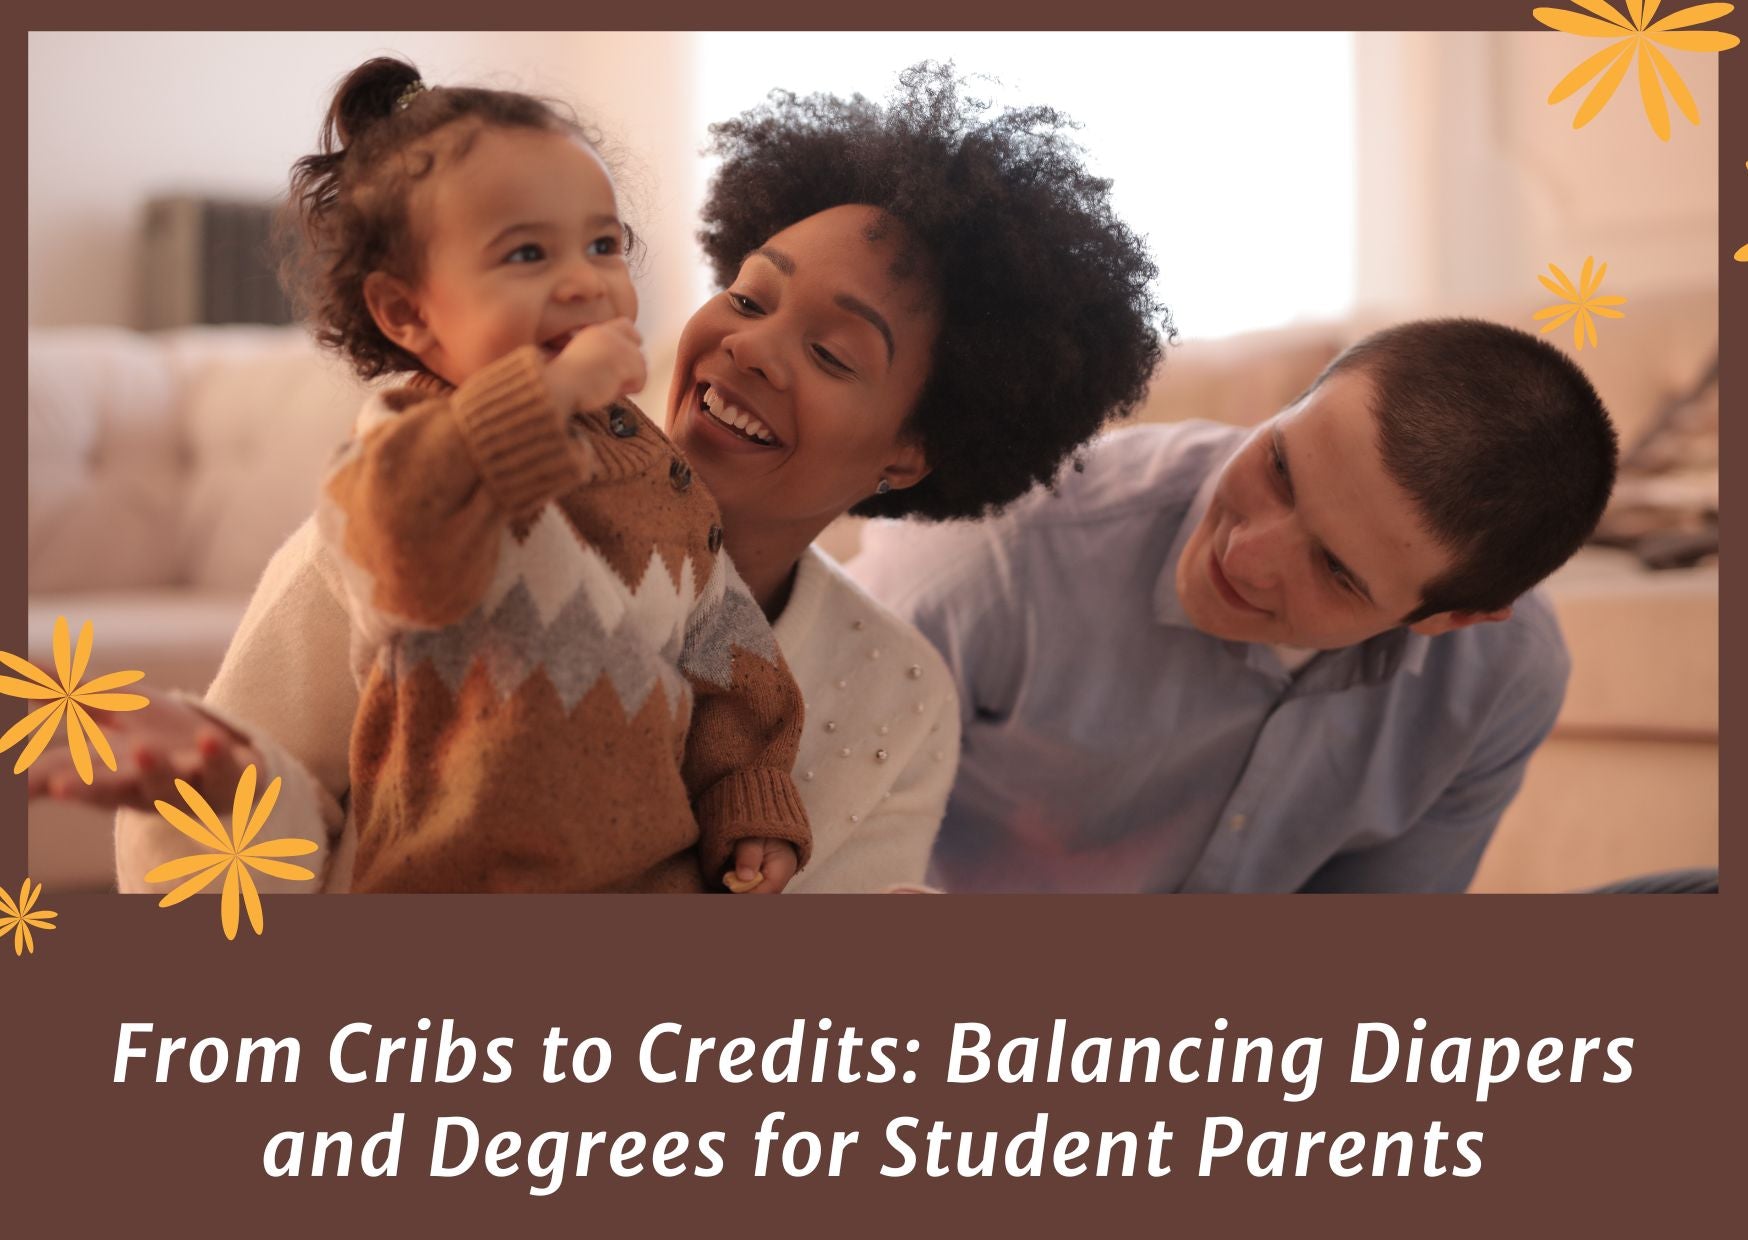 From Cribs to Credits: Balancing Diapers and Degrees for Student Parents